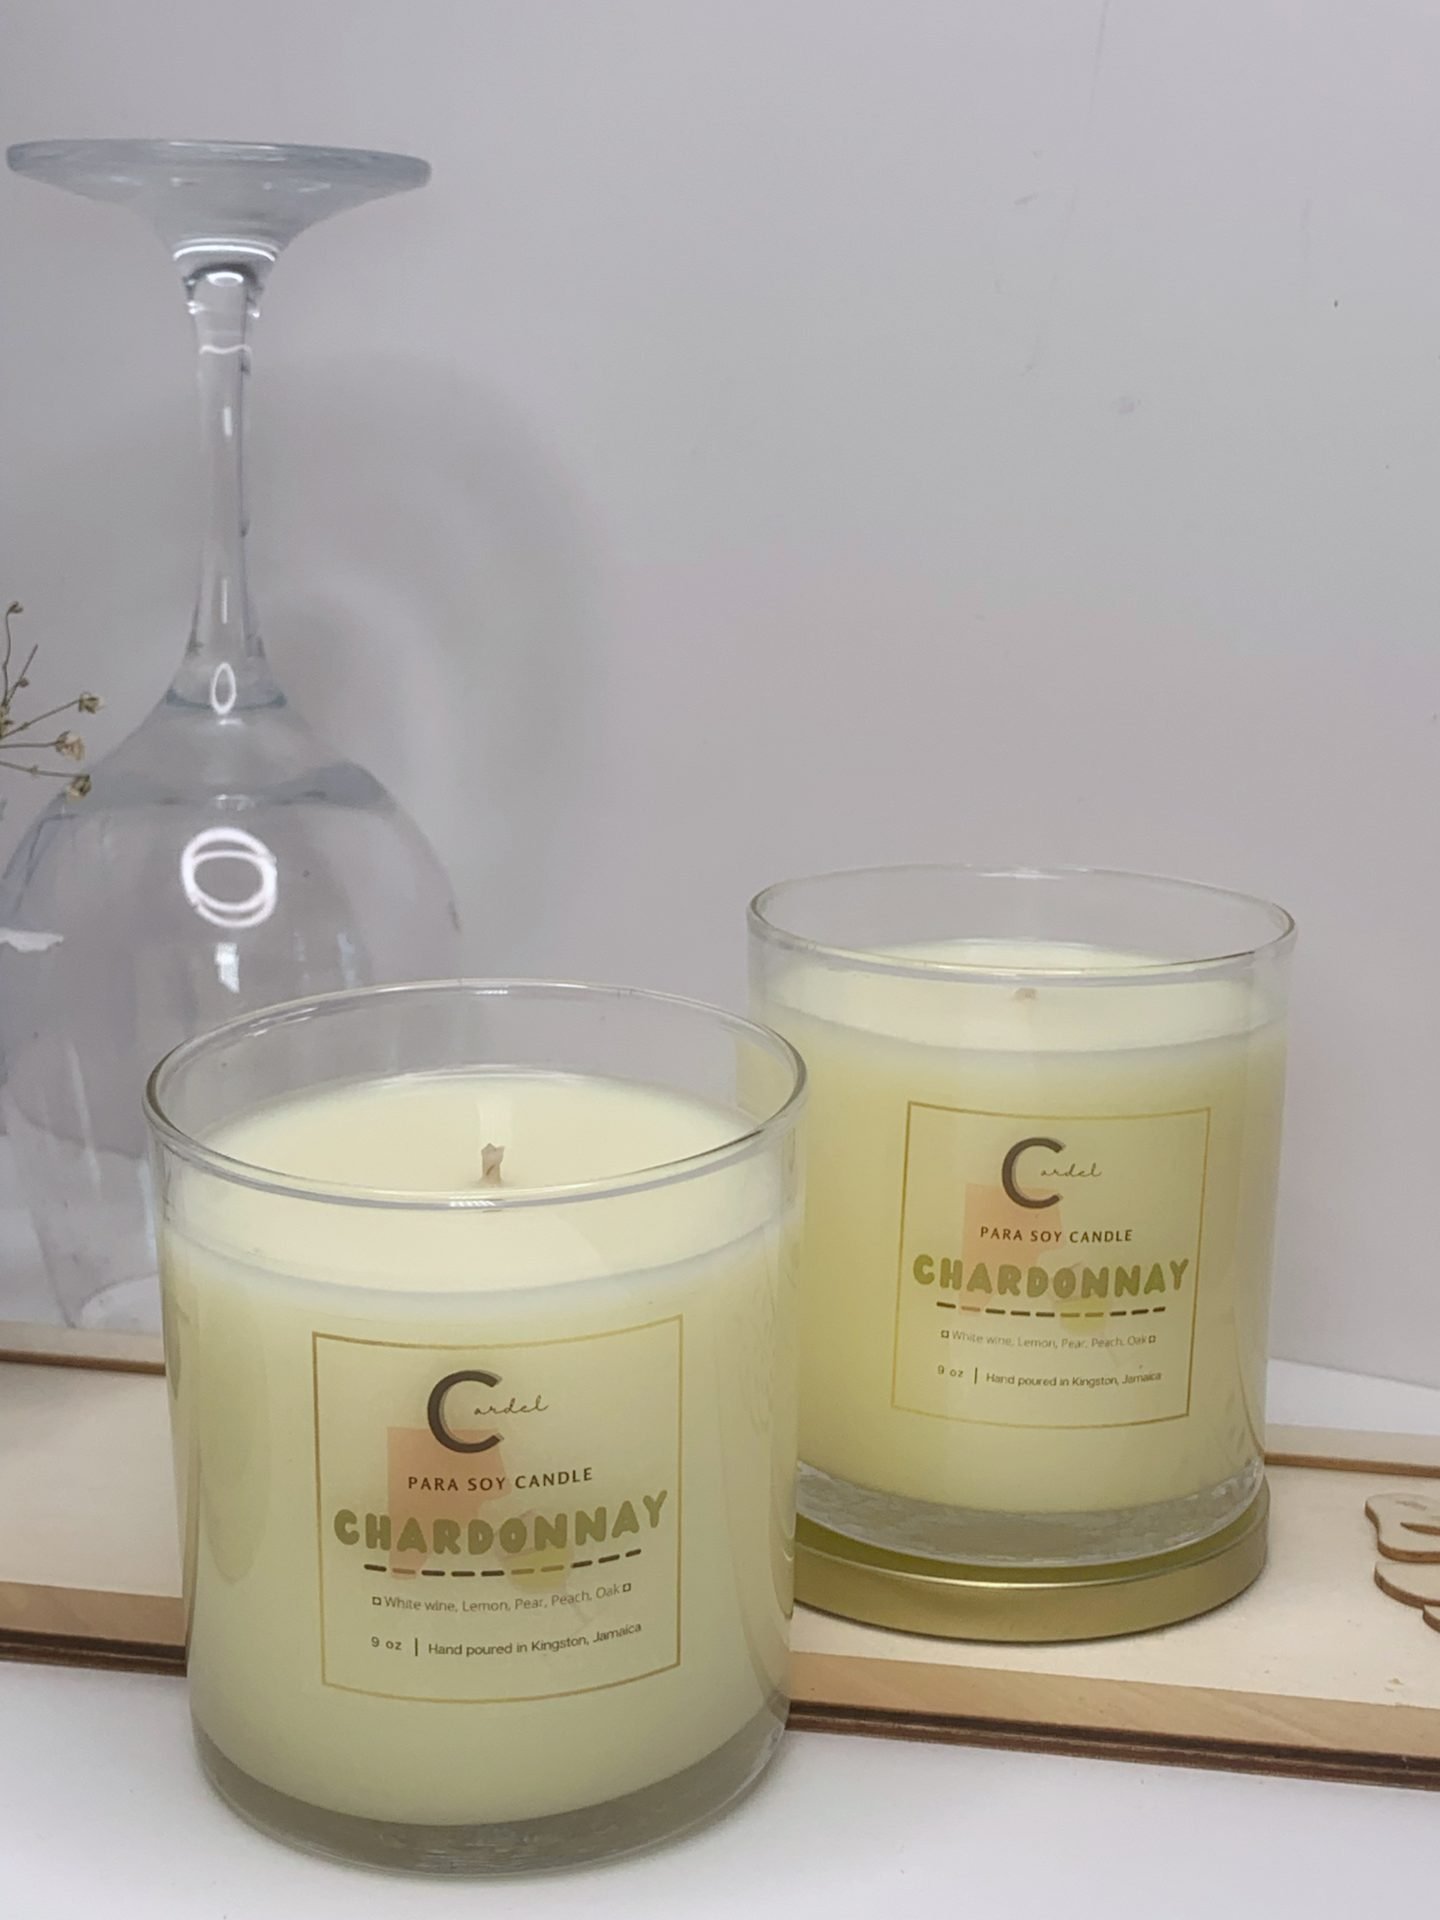 Chardonnay scented candle